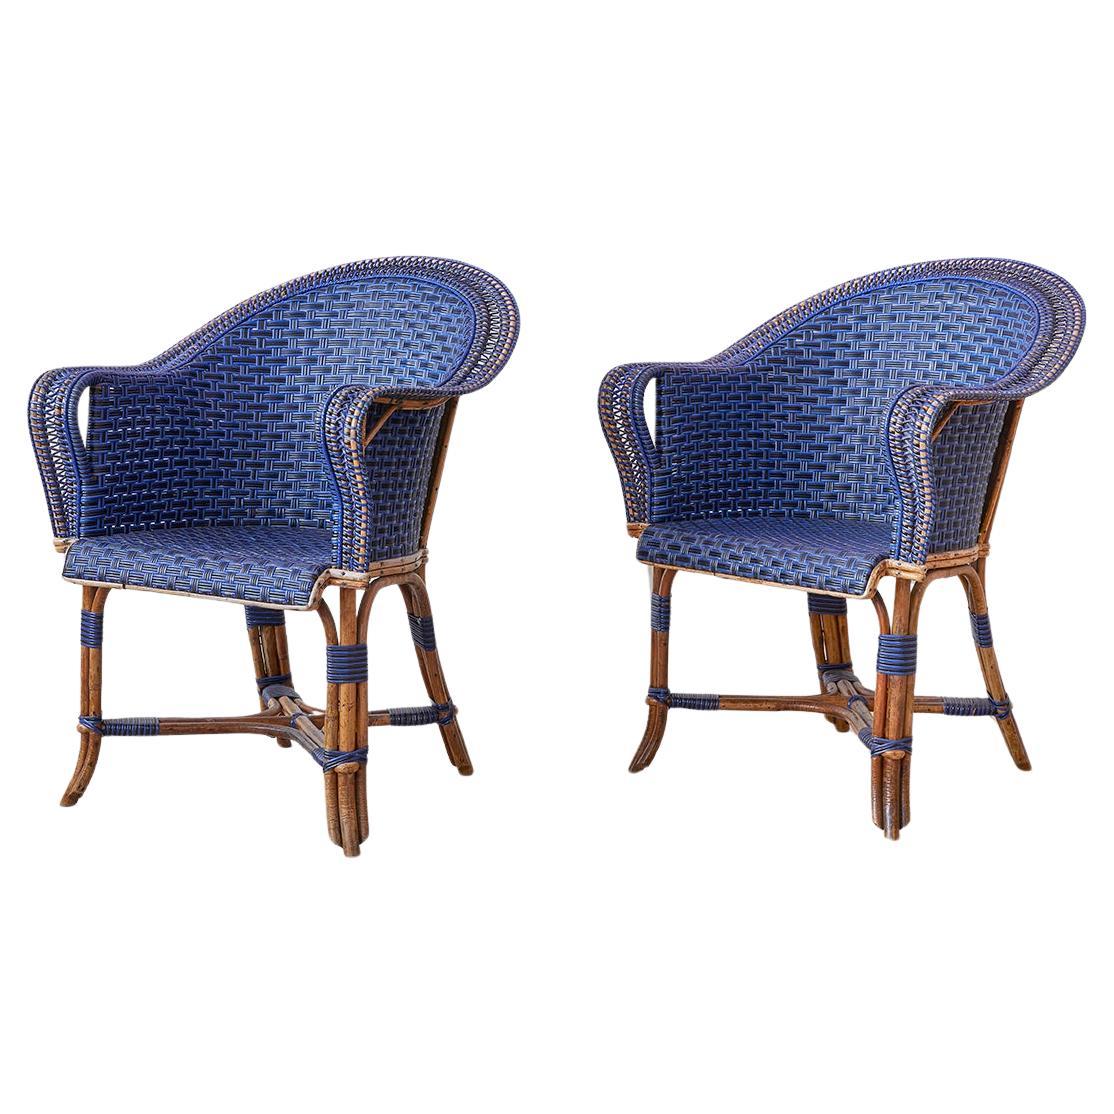 Vintage Pair of Armchairs in Blue and Black Rattan, France, Early 20th Century